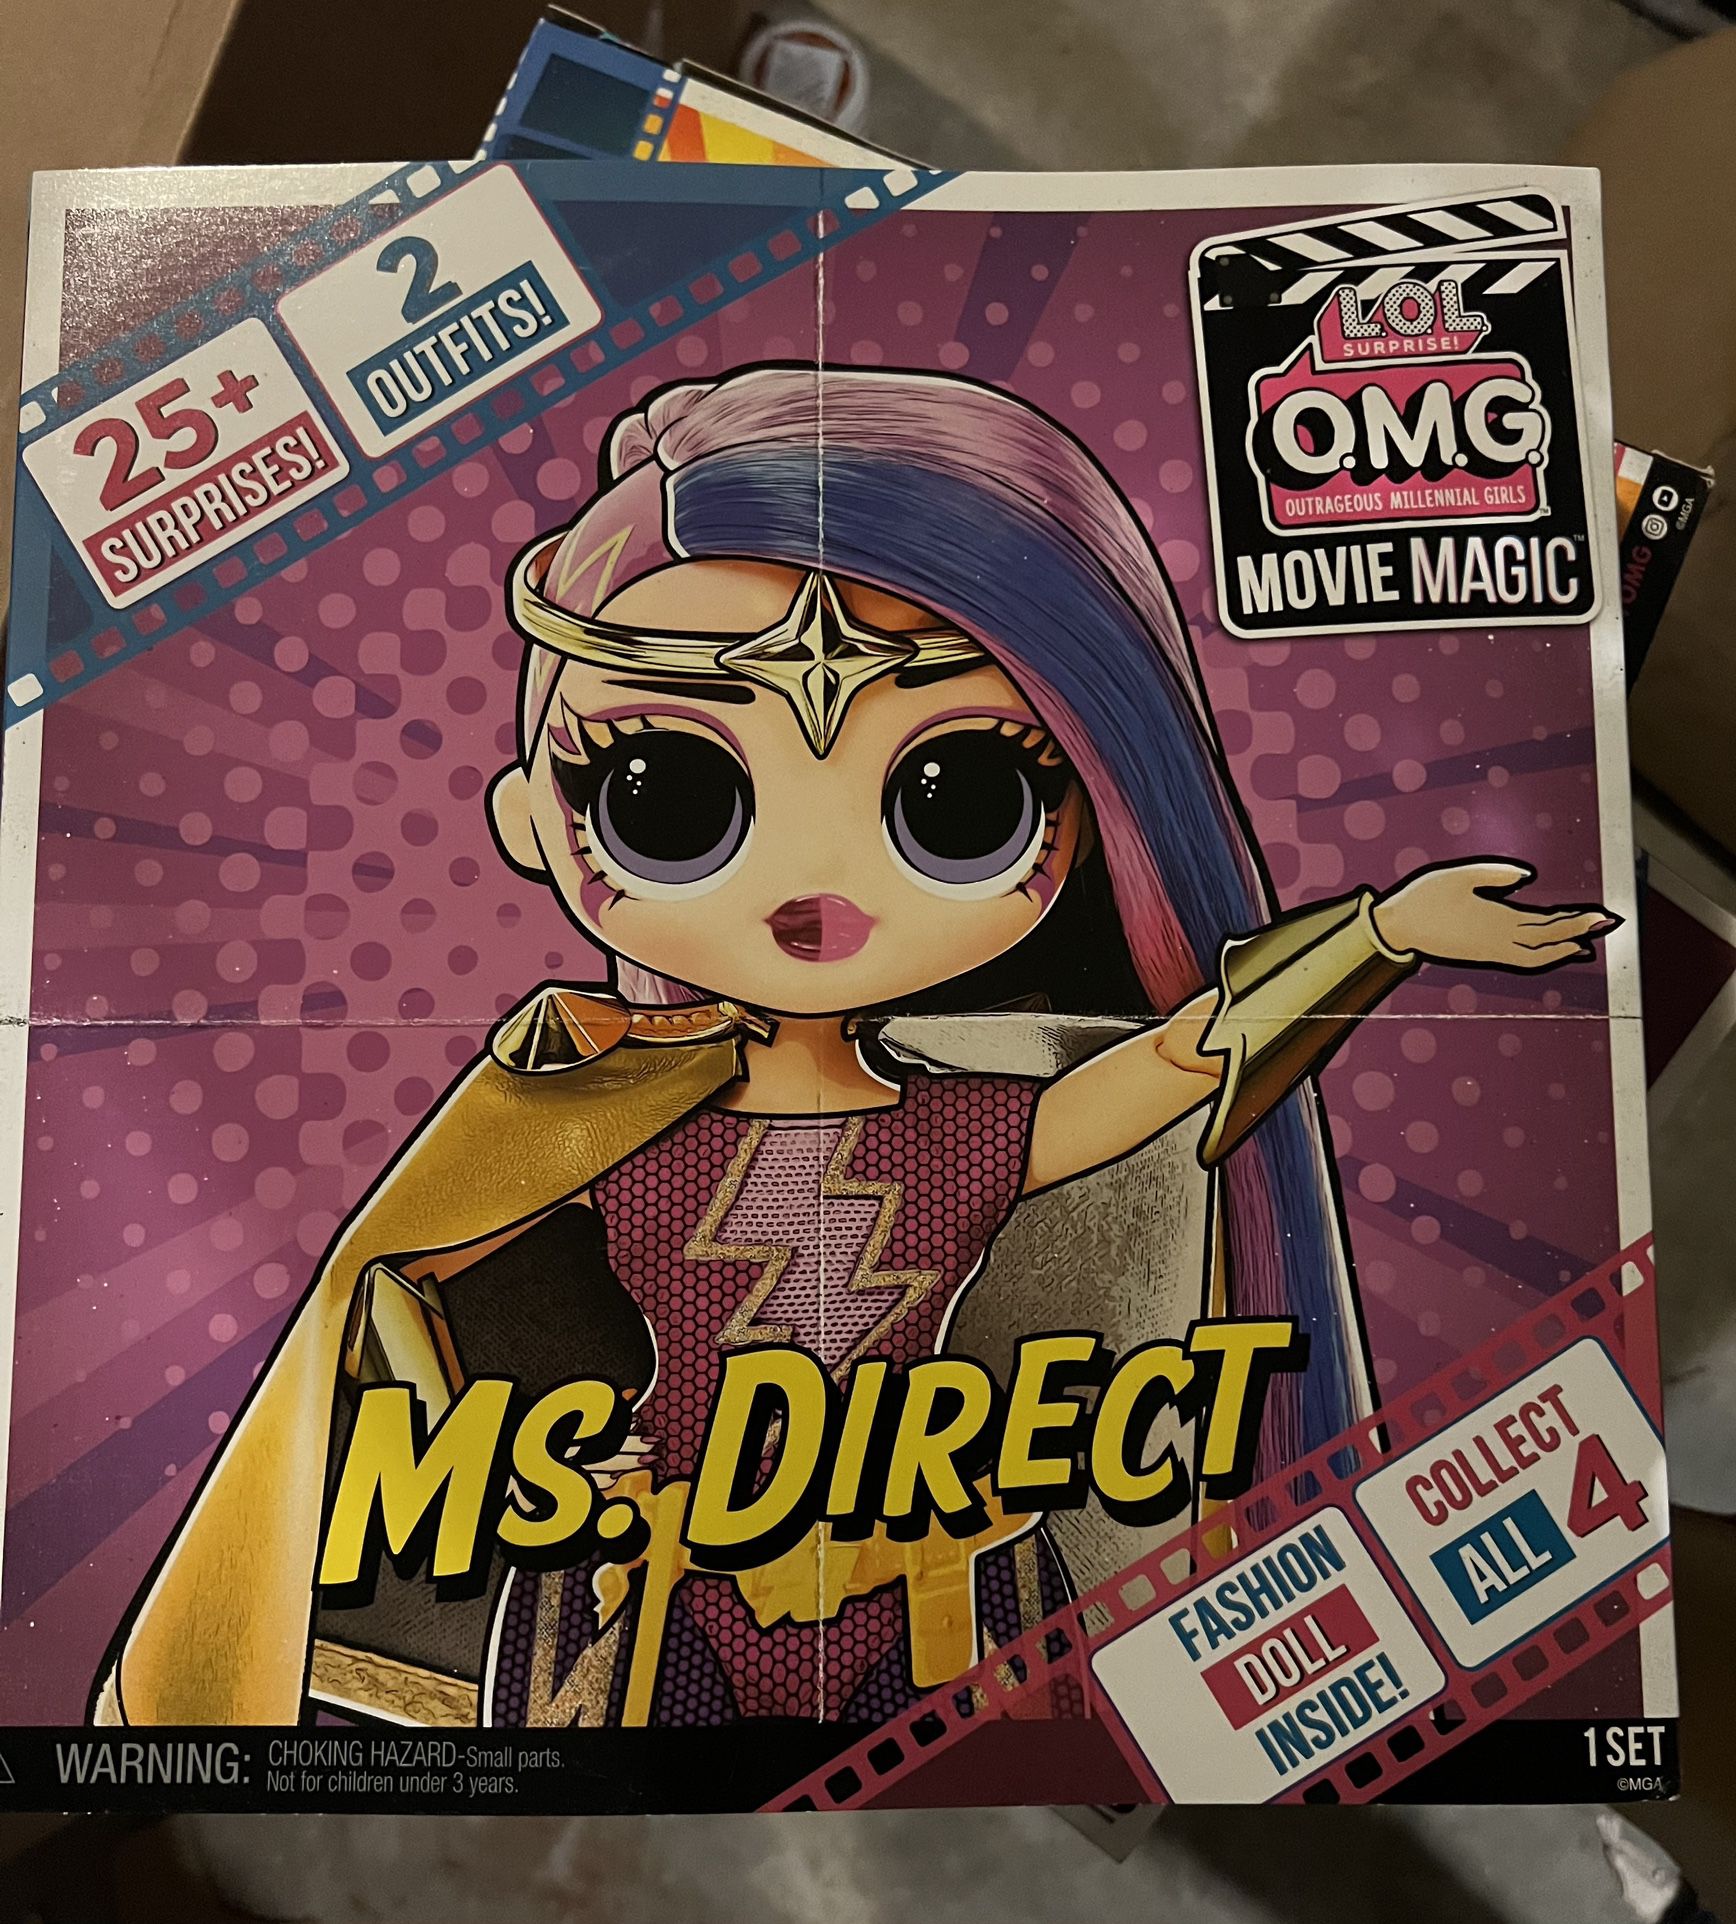 L.O.L. Surprise! OMG Movie Magic Ms. Direct Fashion Doll with 25 Surprises Including 2 Outfits, 3D Glasses, Movie Accessories,Toys for Girls Boys Ages